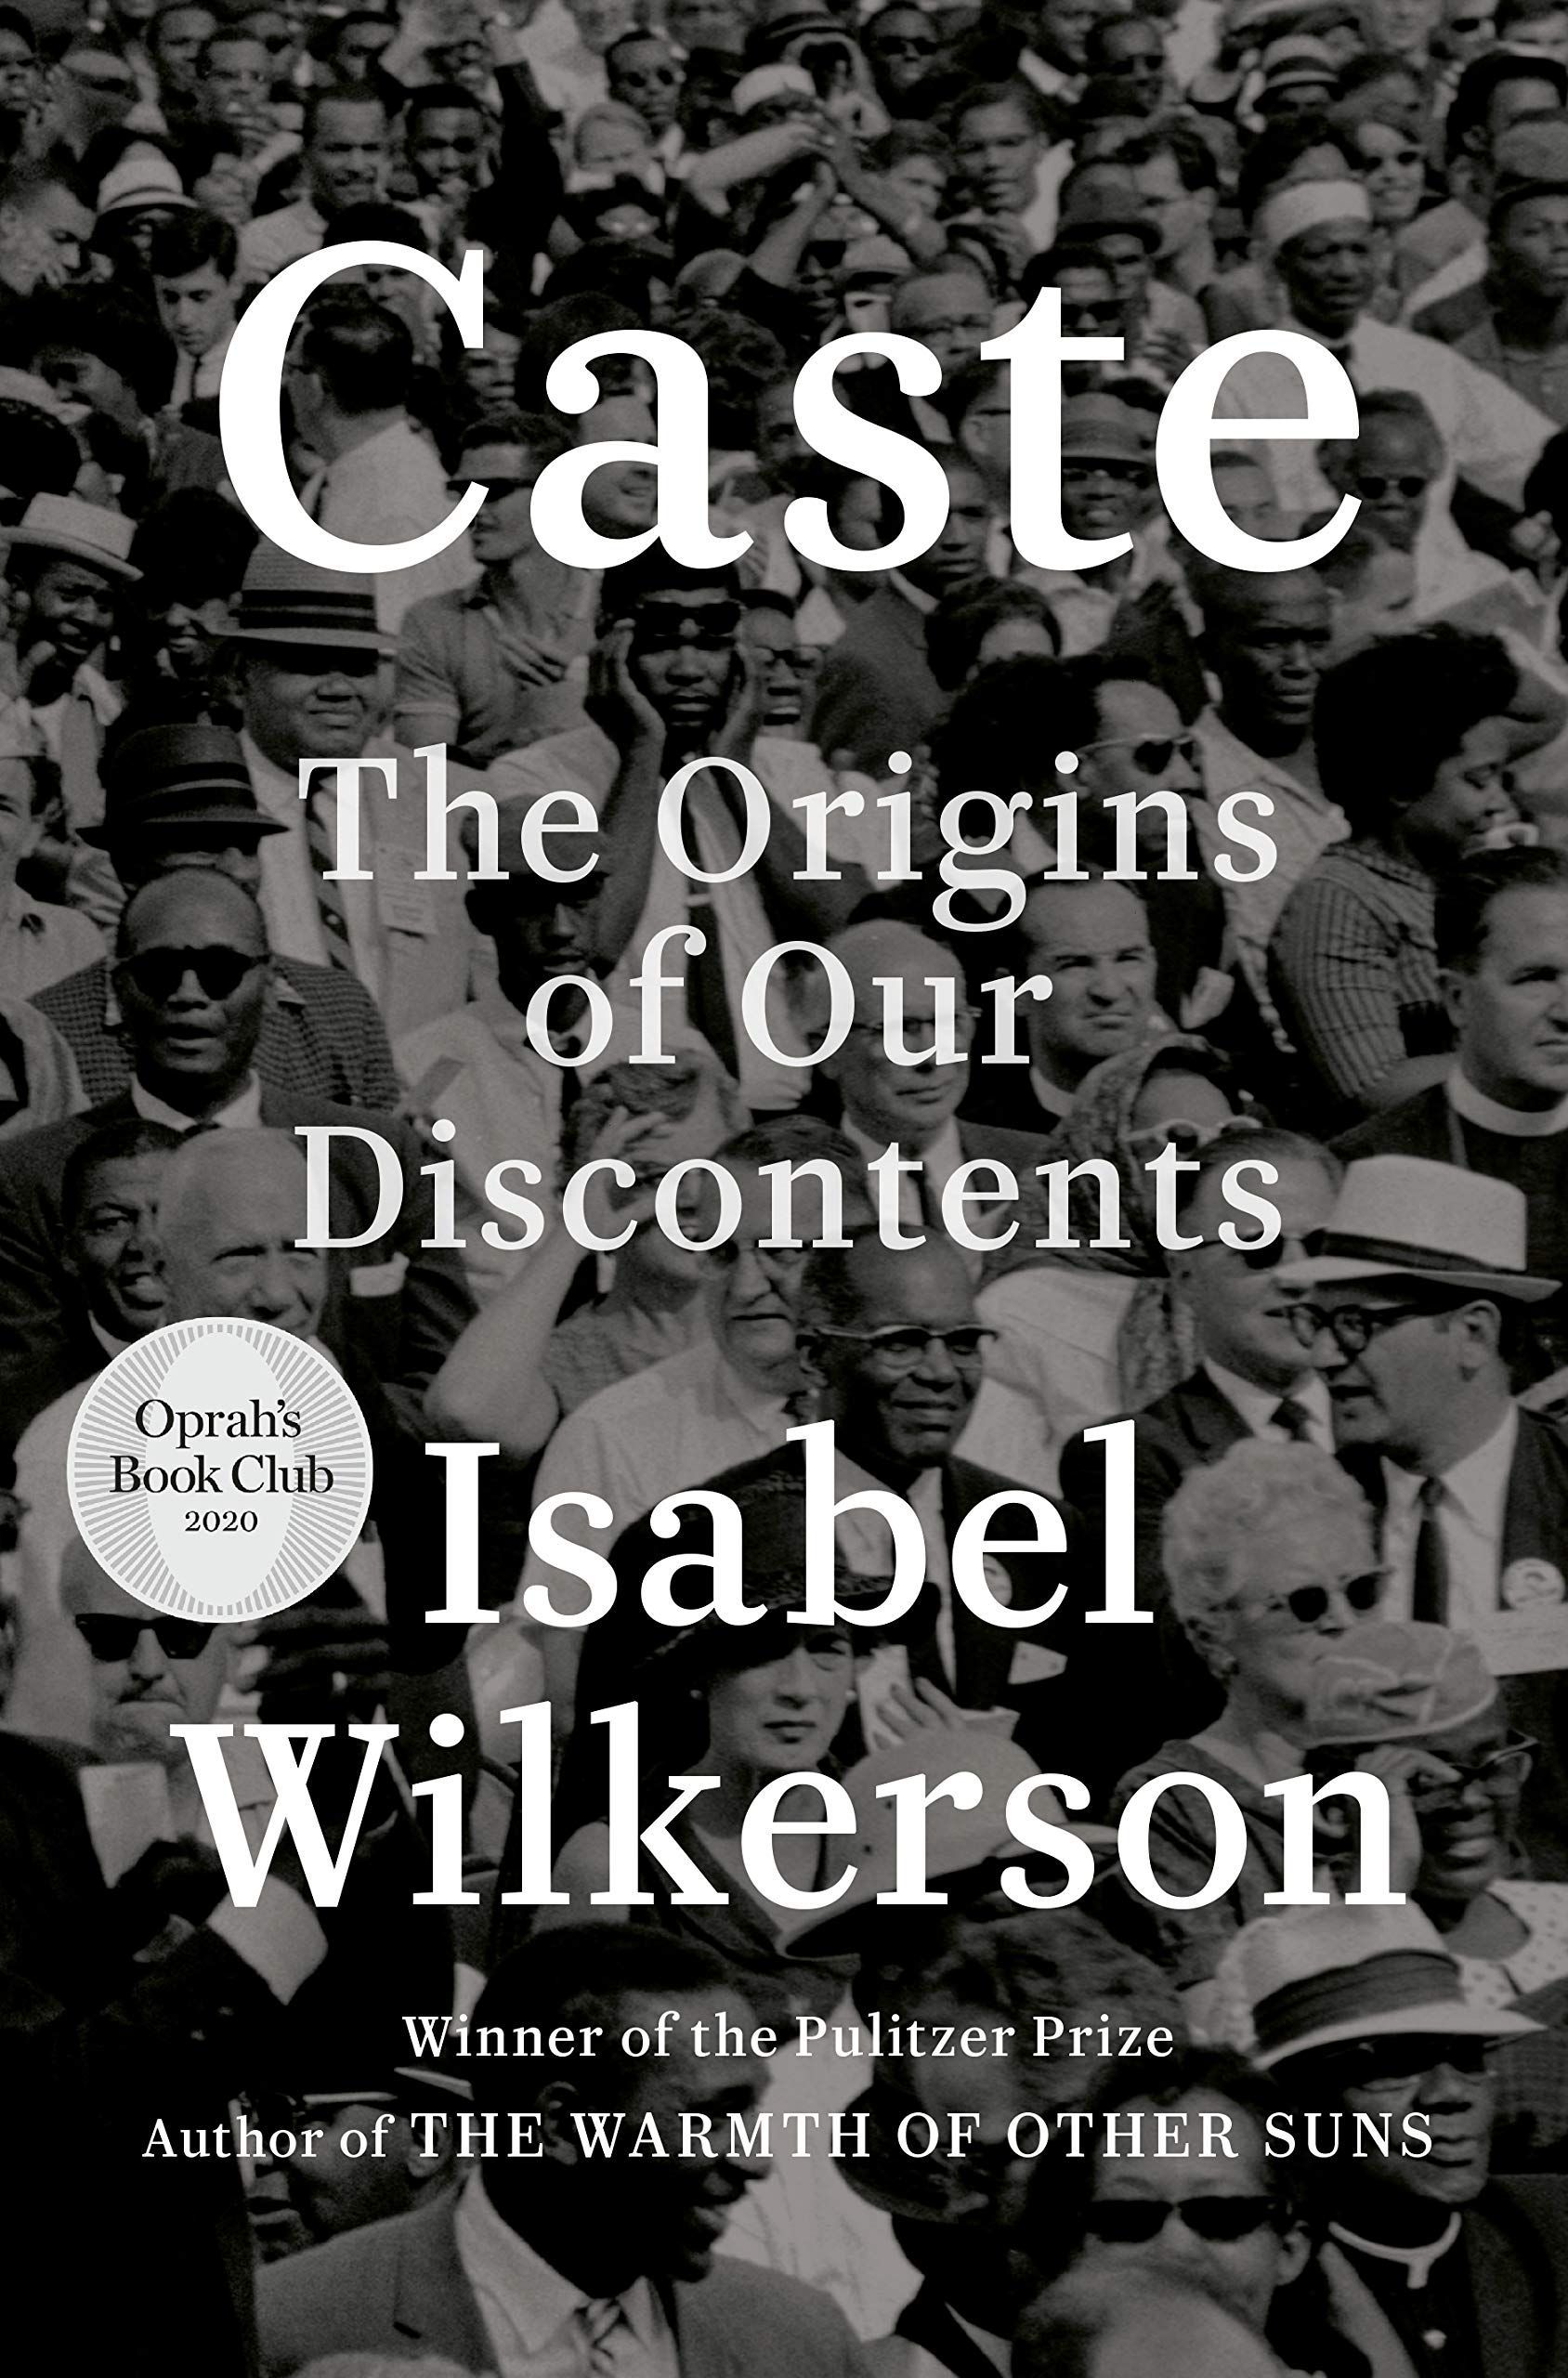 The Work of Analogy: On Isabel Wilkerson’s “Caste: The Origins of Our Discontents”